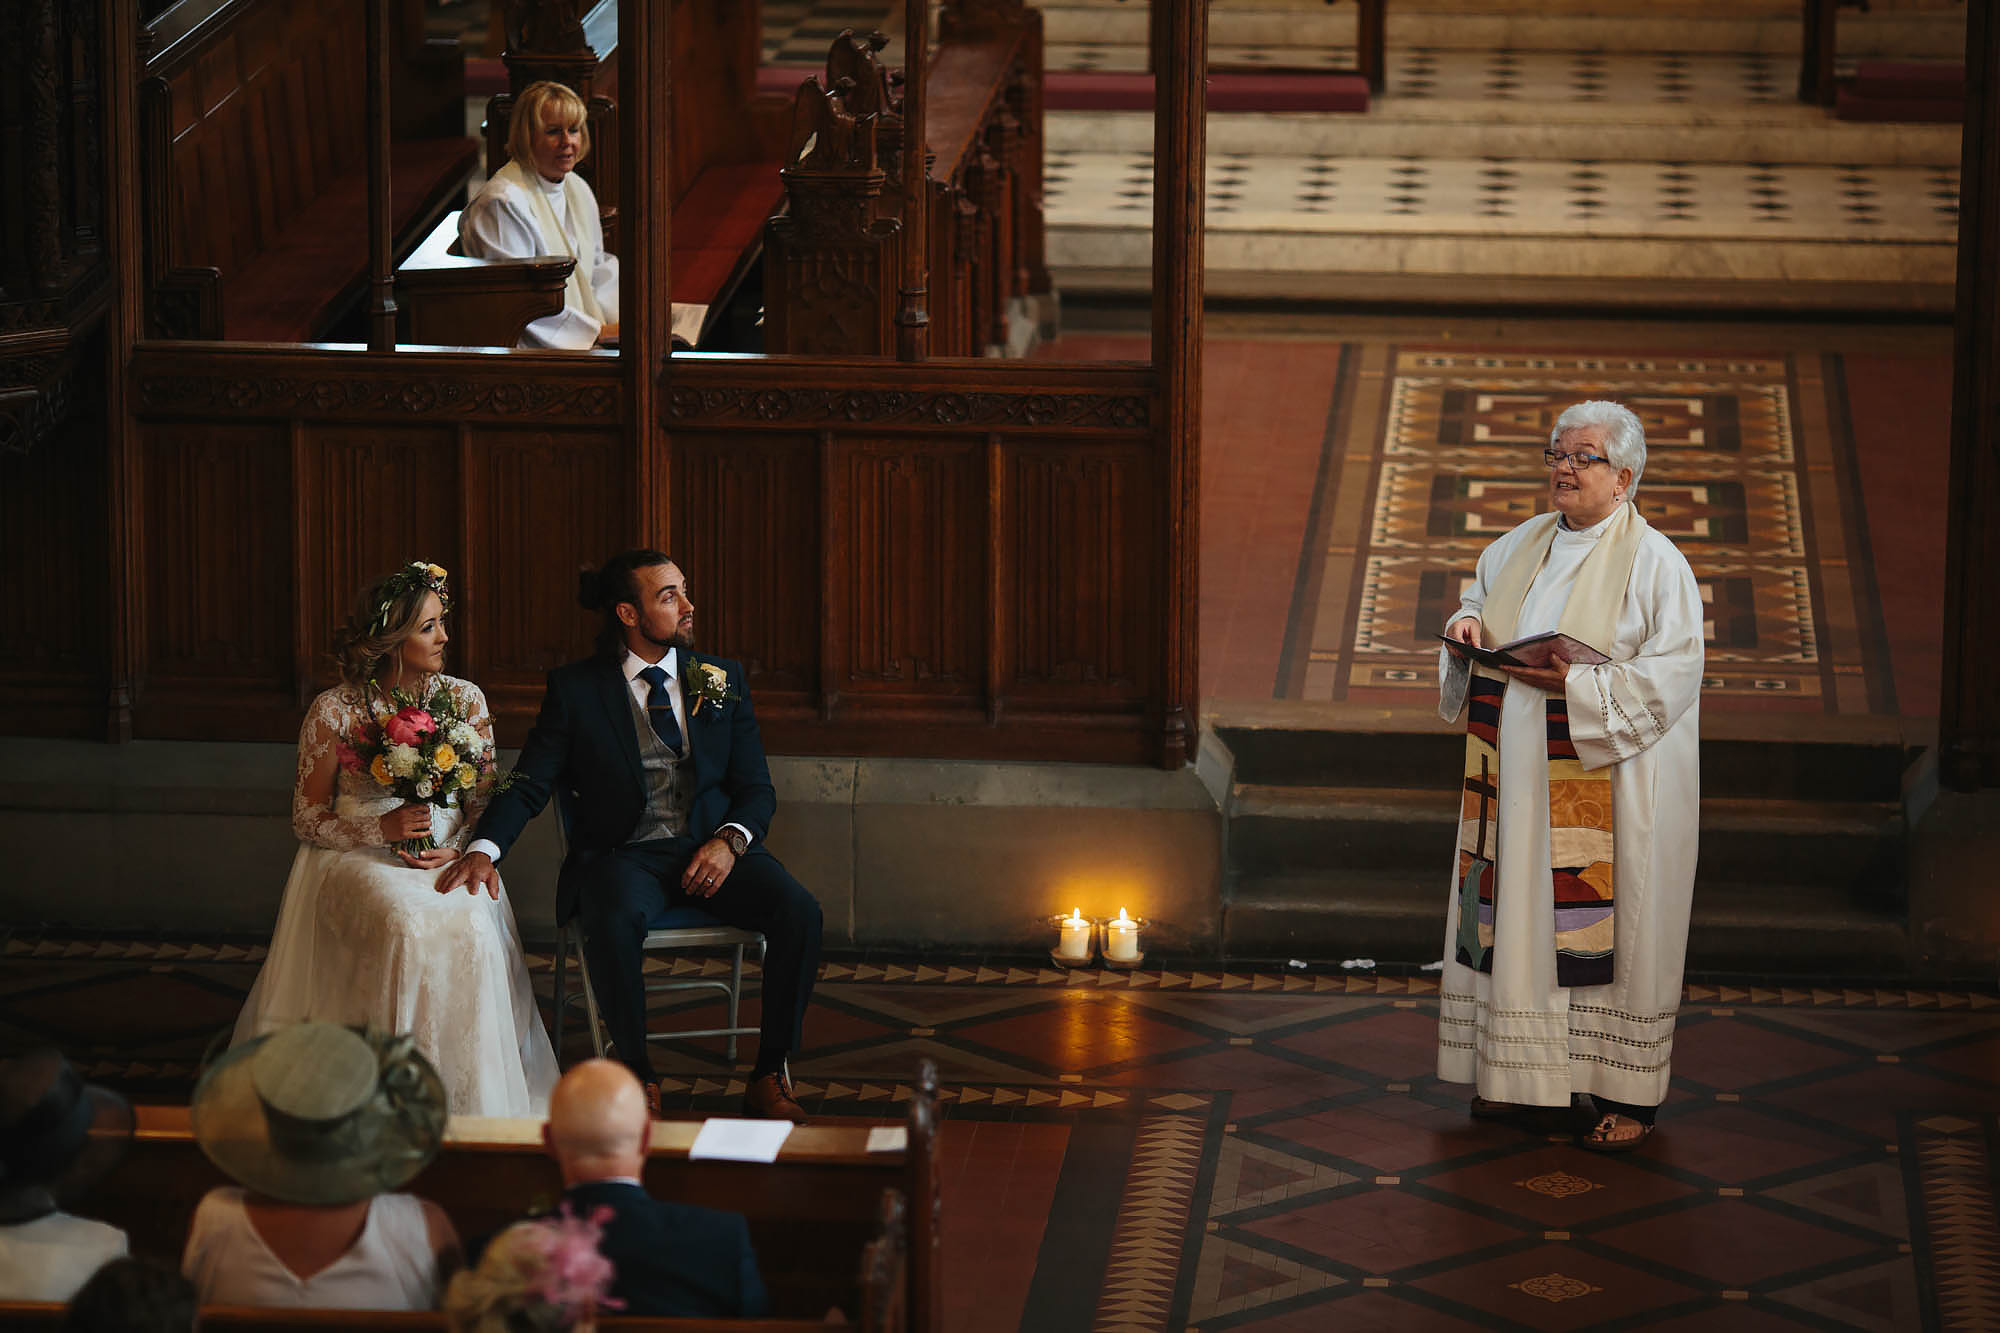 Bride and groom look to the vicar during the wedding ceremony in Manchester